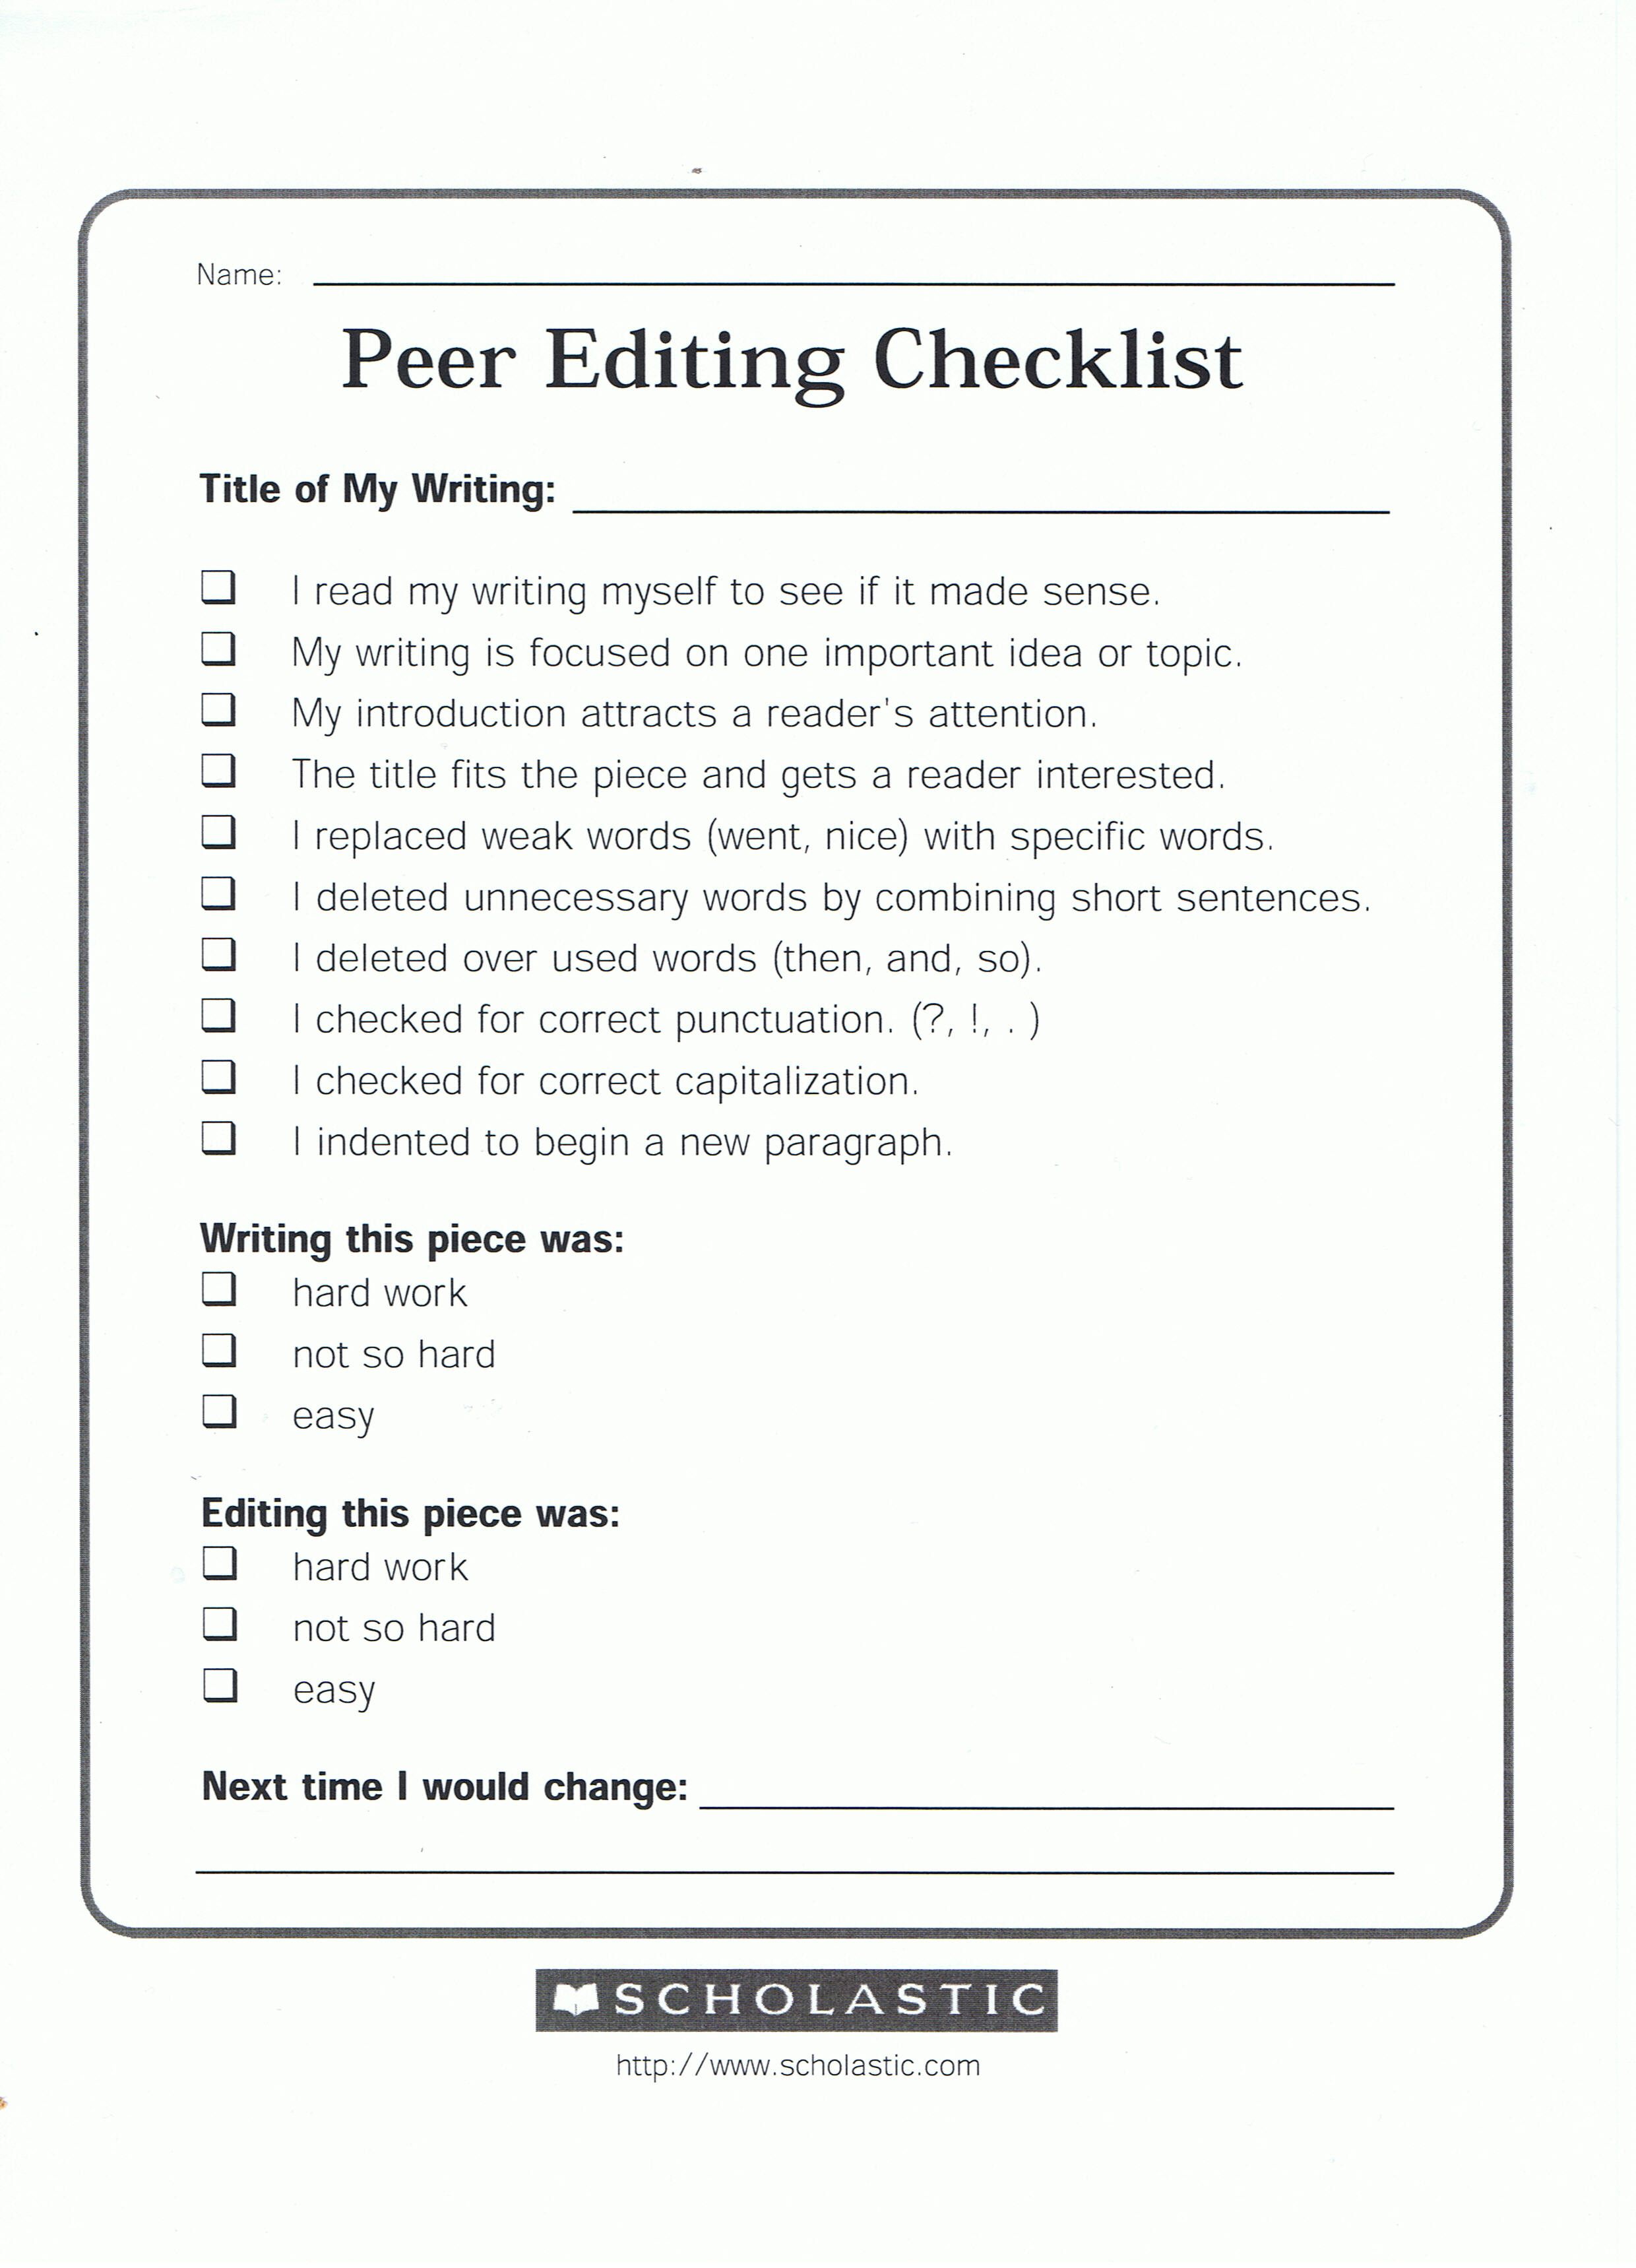 Essay Editing Exercises And Proofreading Collection Of Solutions | Proofreading Worksheets Middle School Printable